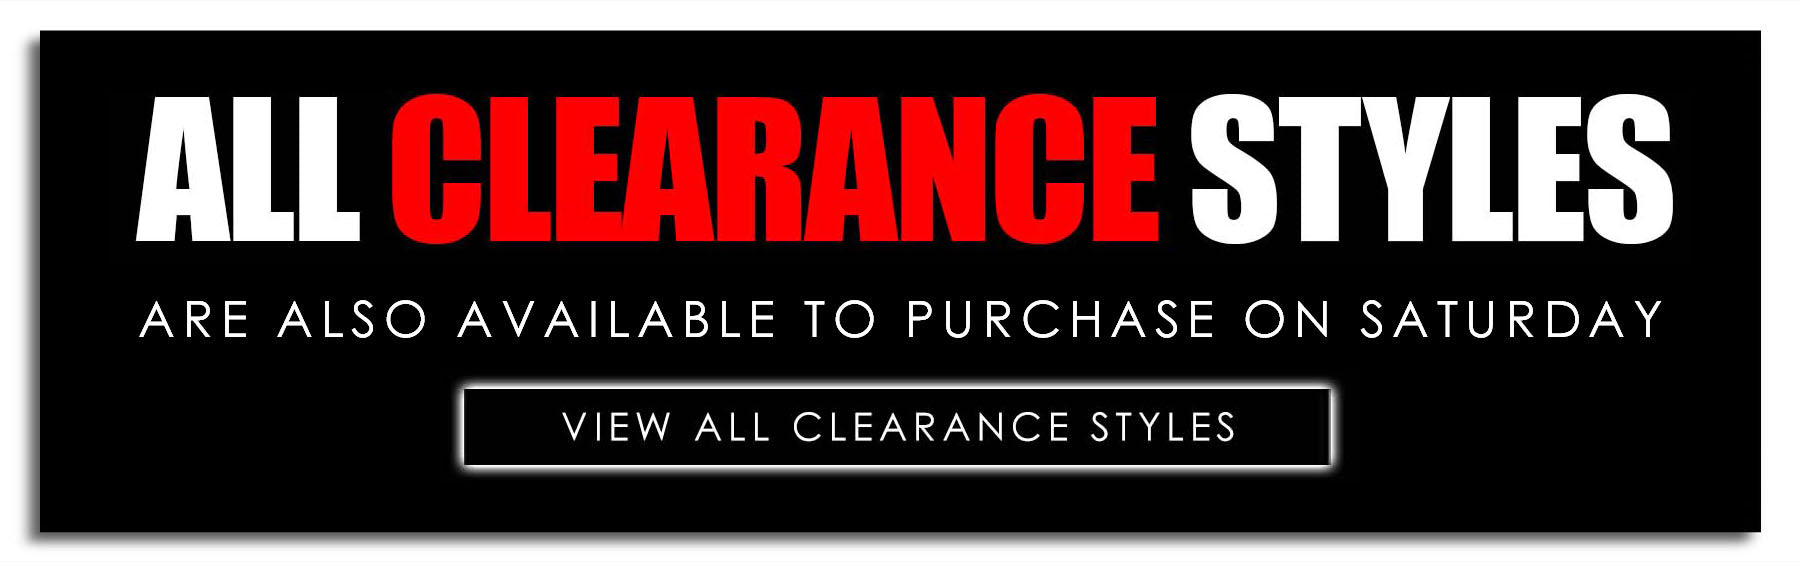 All Clearance Styles